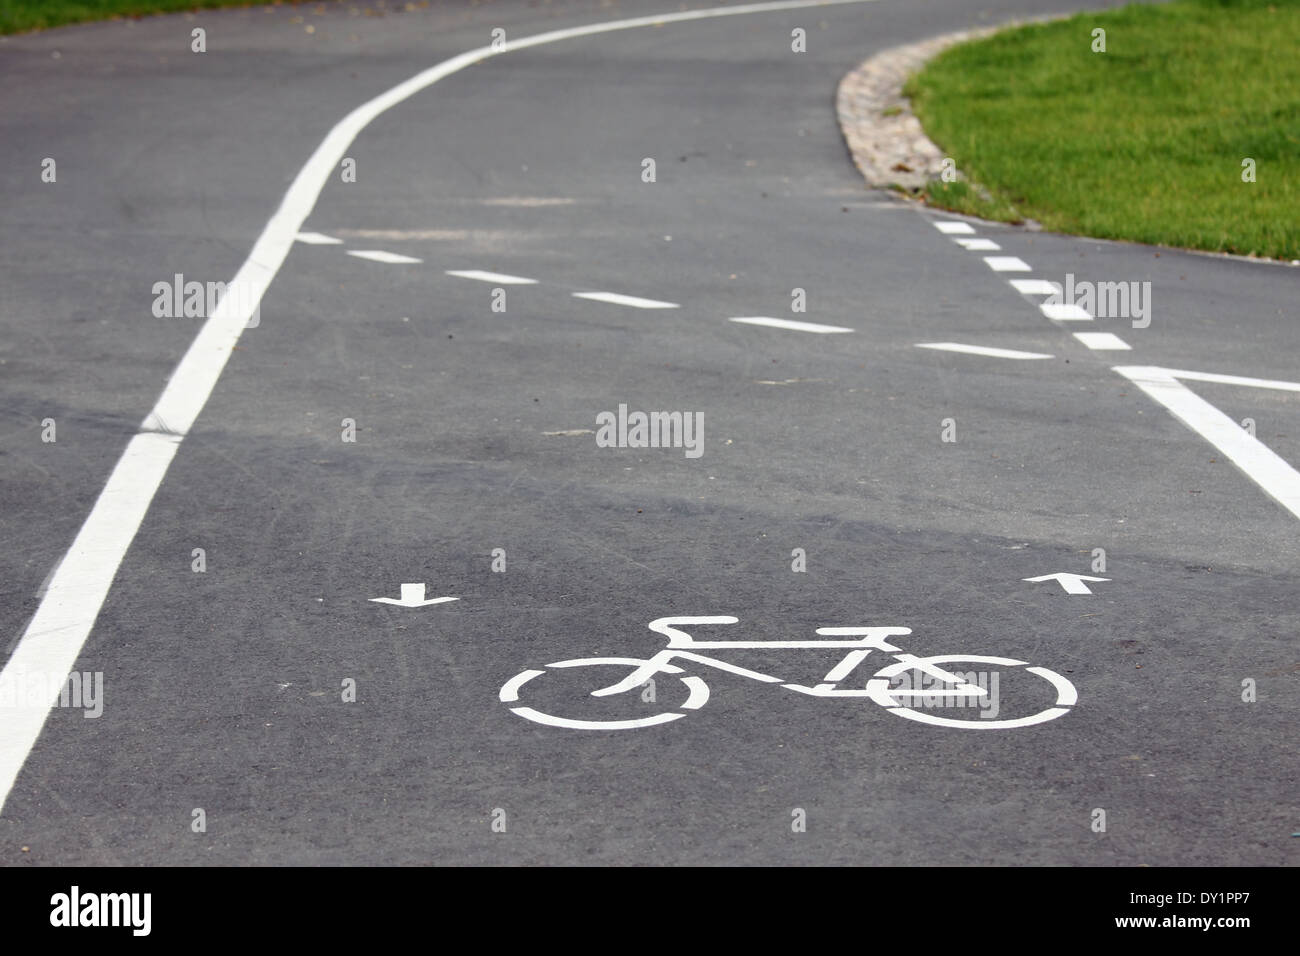 Bicycle route sign on the road and arrows pointing direction Stock Photo